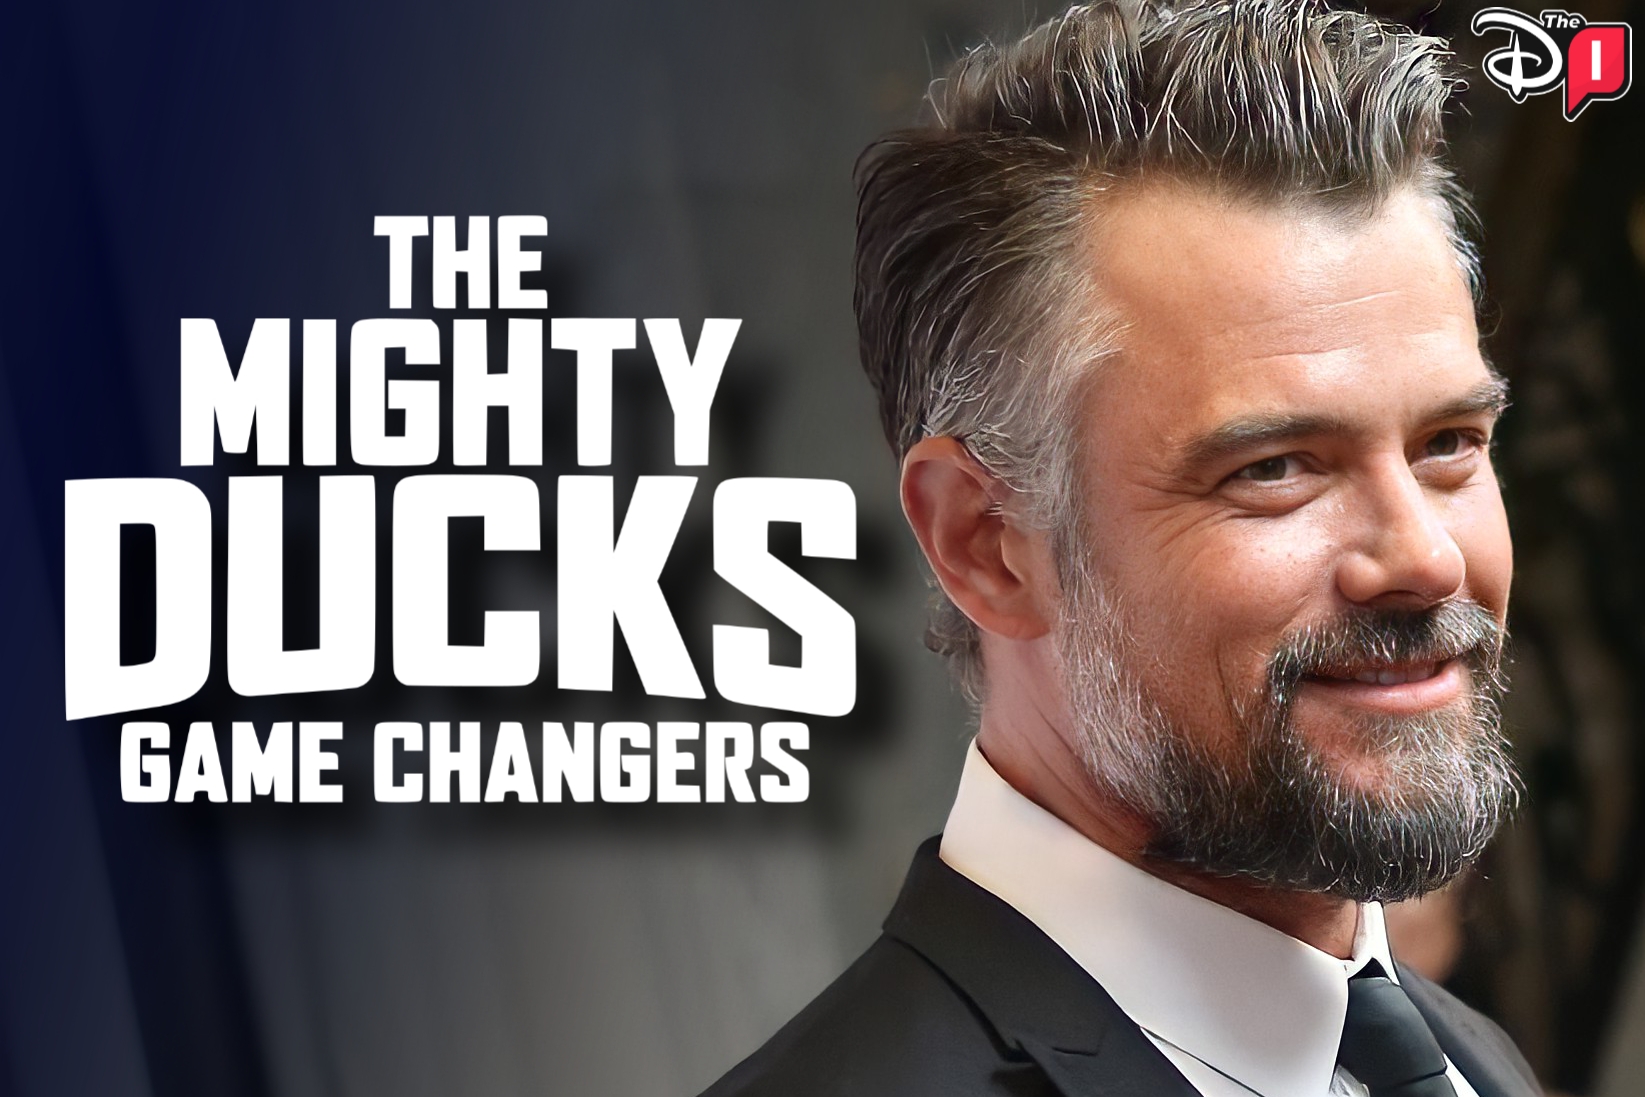 Josh Duhamel to Replace Emilio Estevez as Male Lead in ‘The Mighty Ducks: Game Changers’